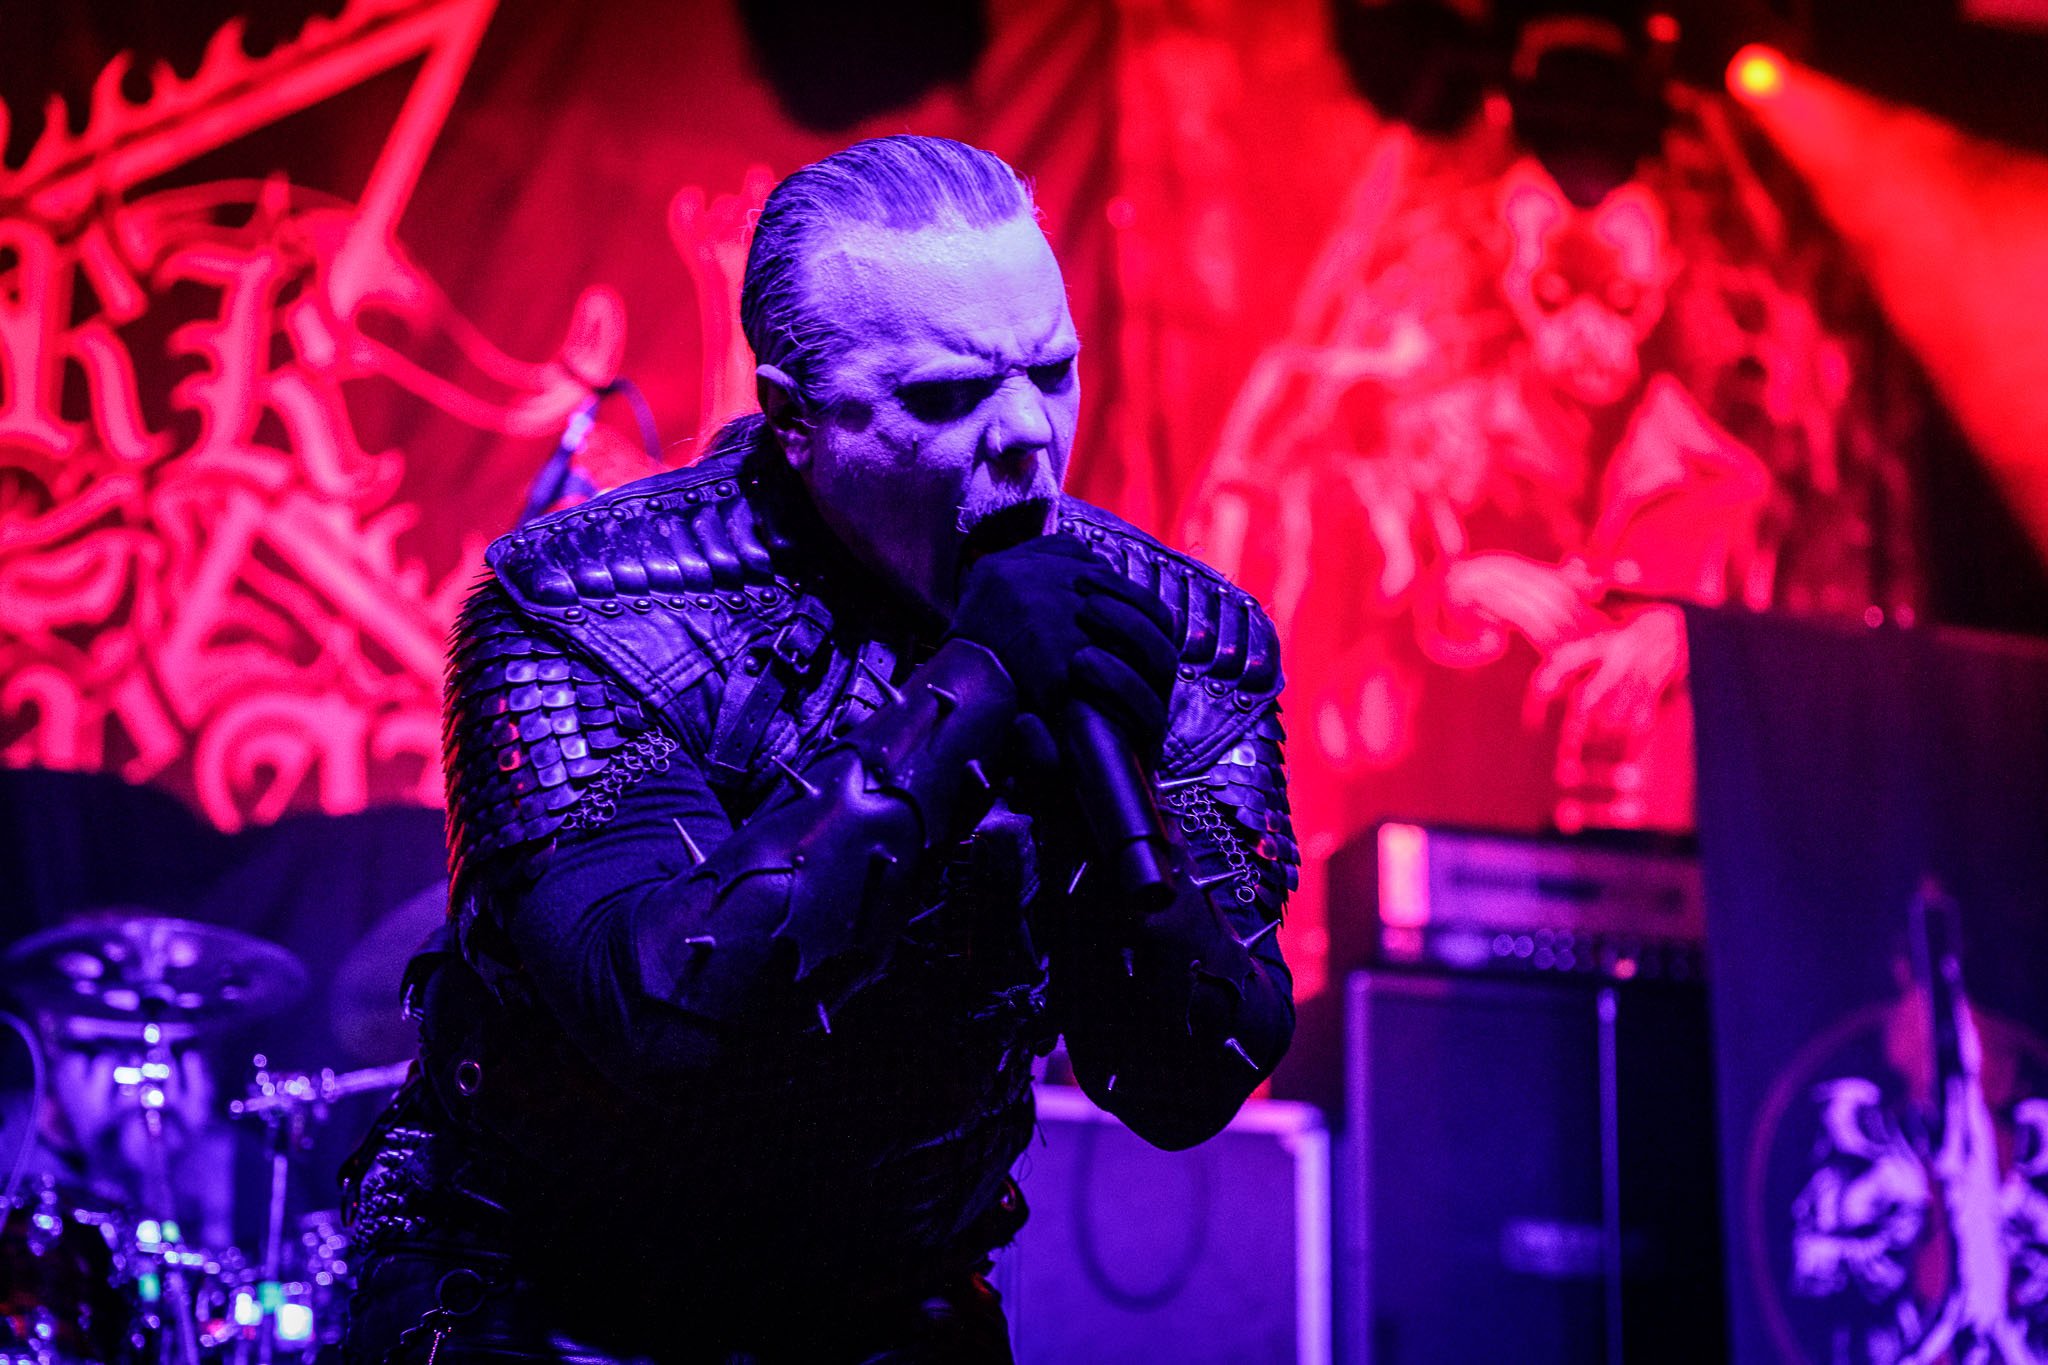 Dark Funeral at the Academy in Manchester on April 21st 2023 ©J